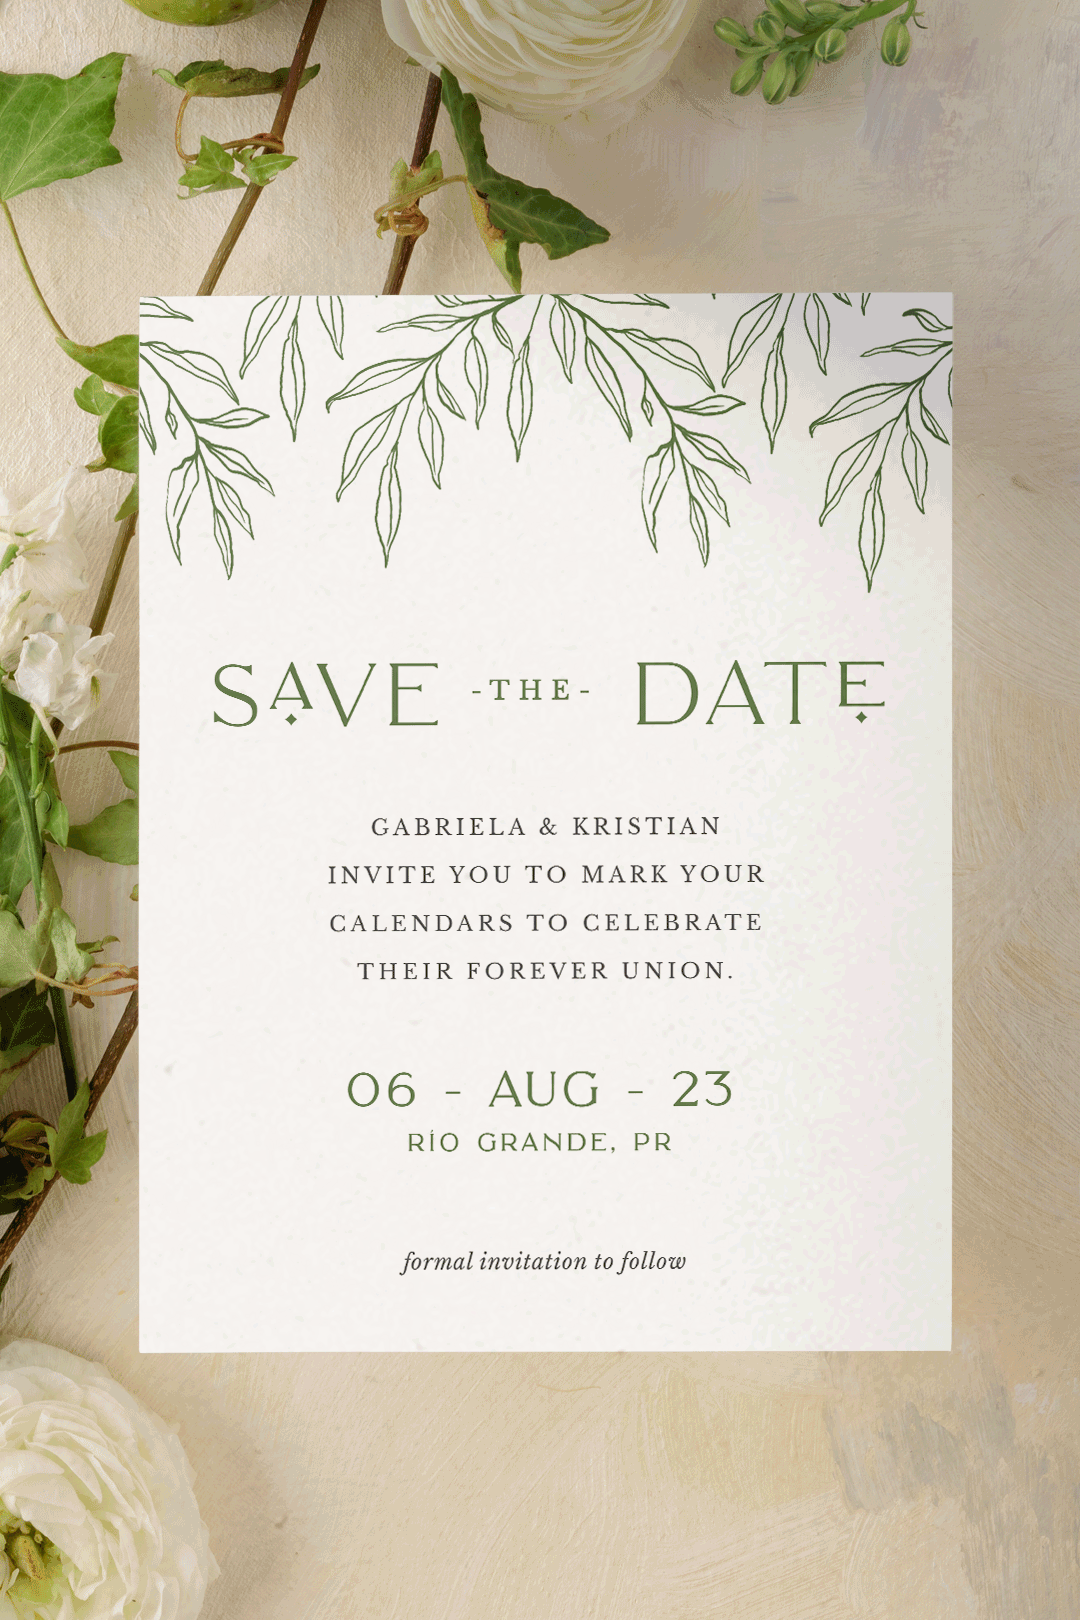 Digital Animated Garden Wedding Save the Date with Eucalyptus leaves